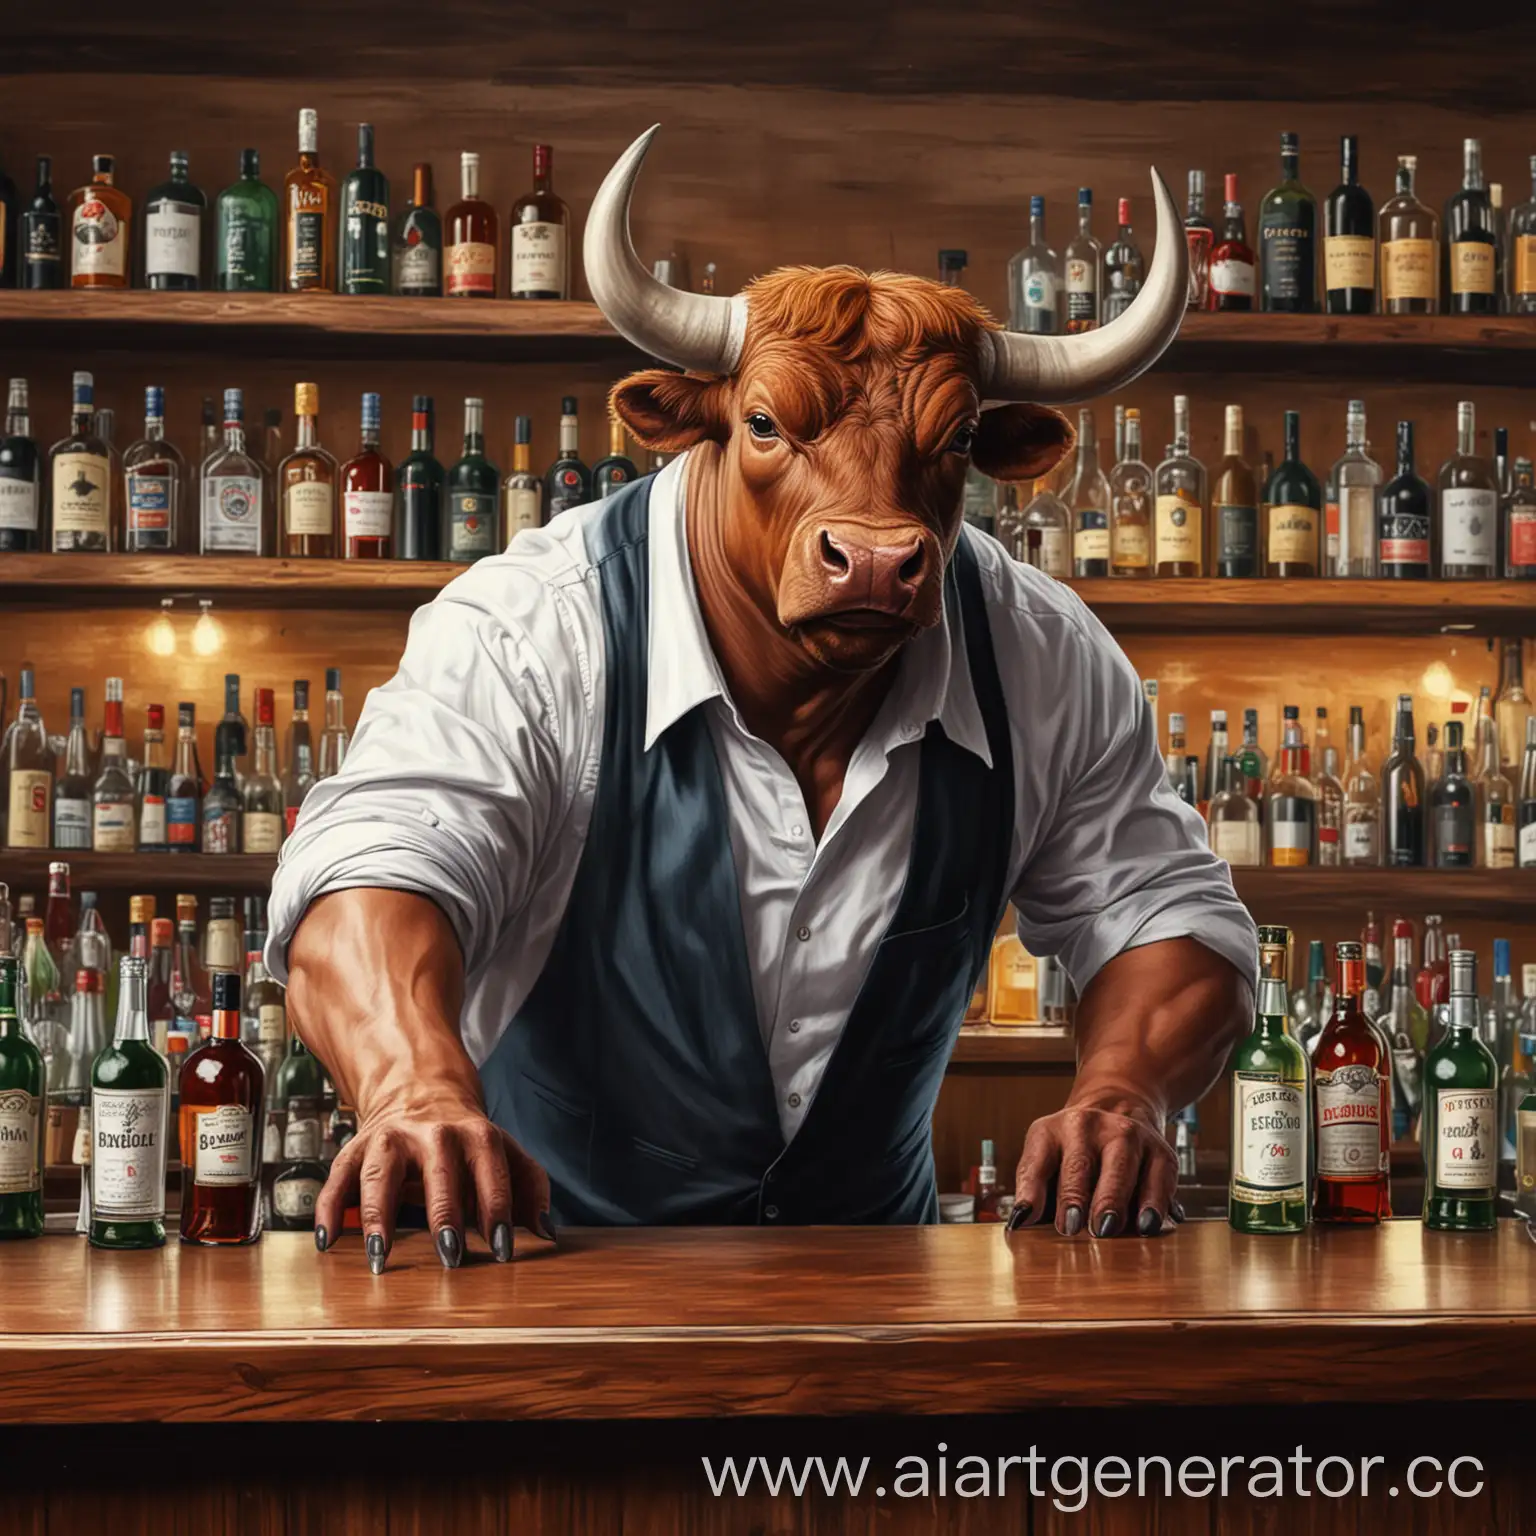 Bull-Bartender-Behind-Bar-Counter-Serving-Drinks-with-Bottles-of-Alcohol